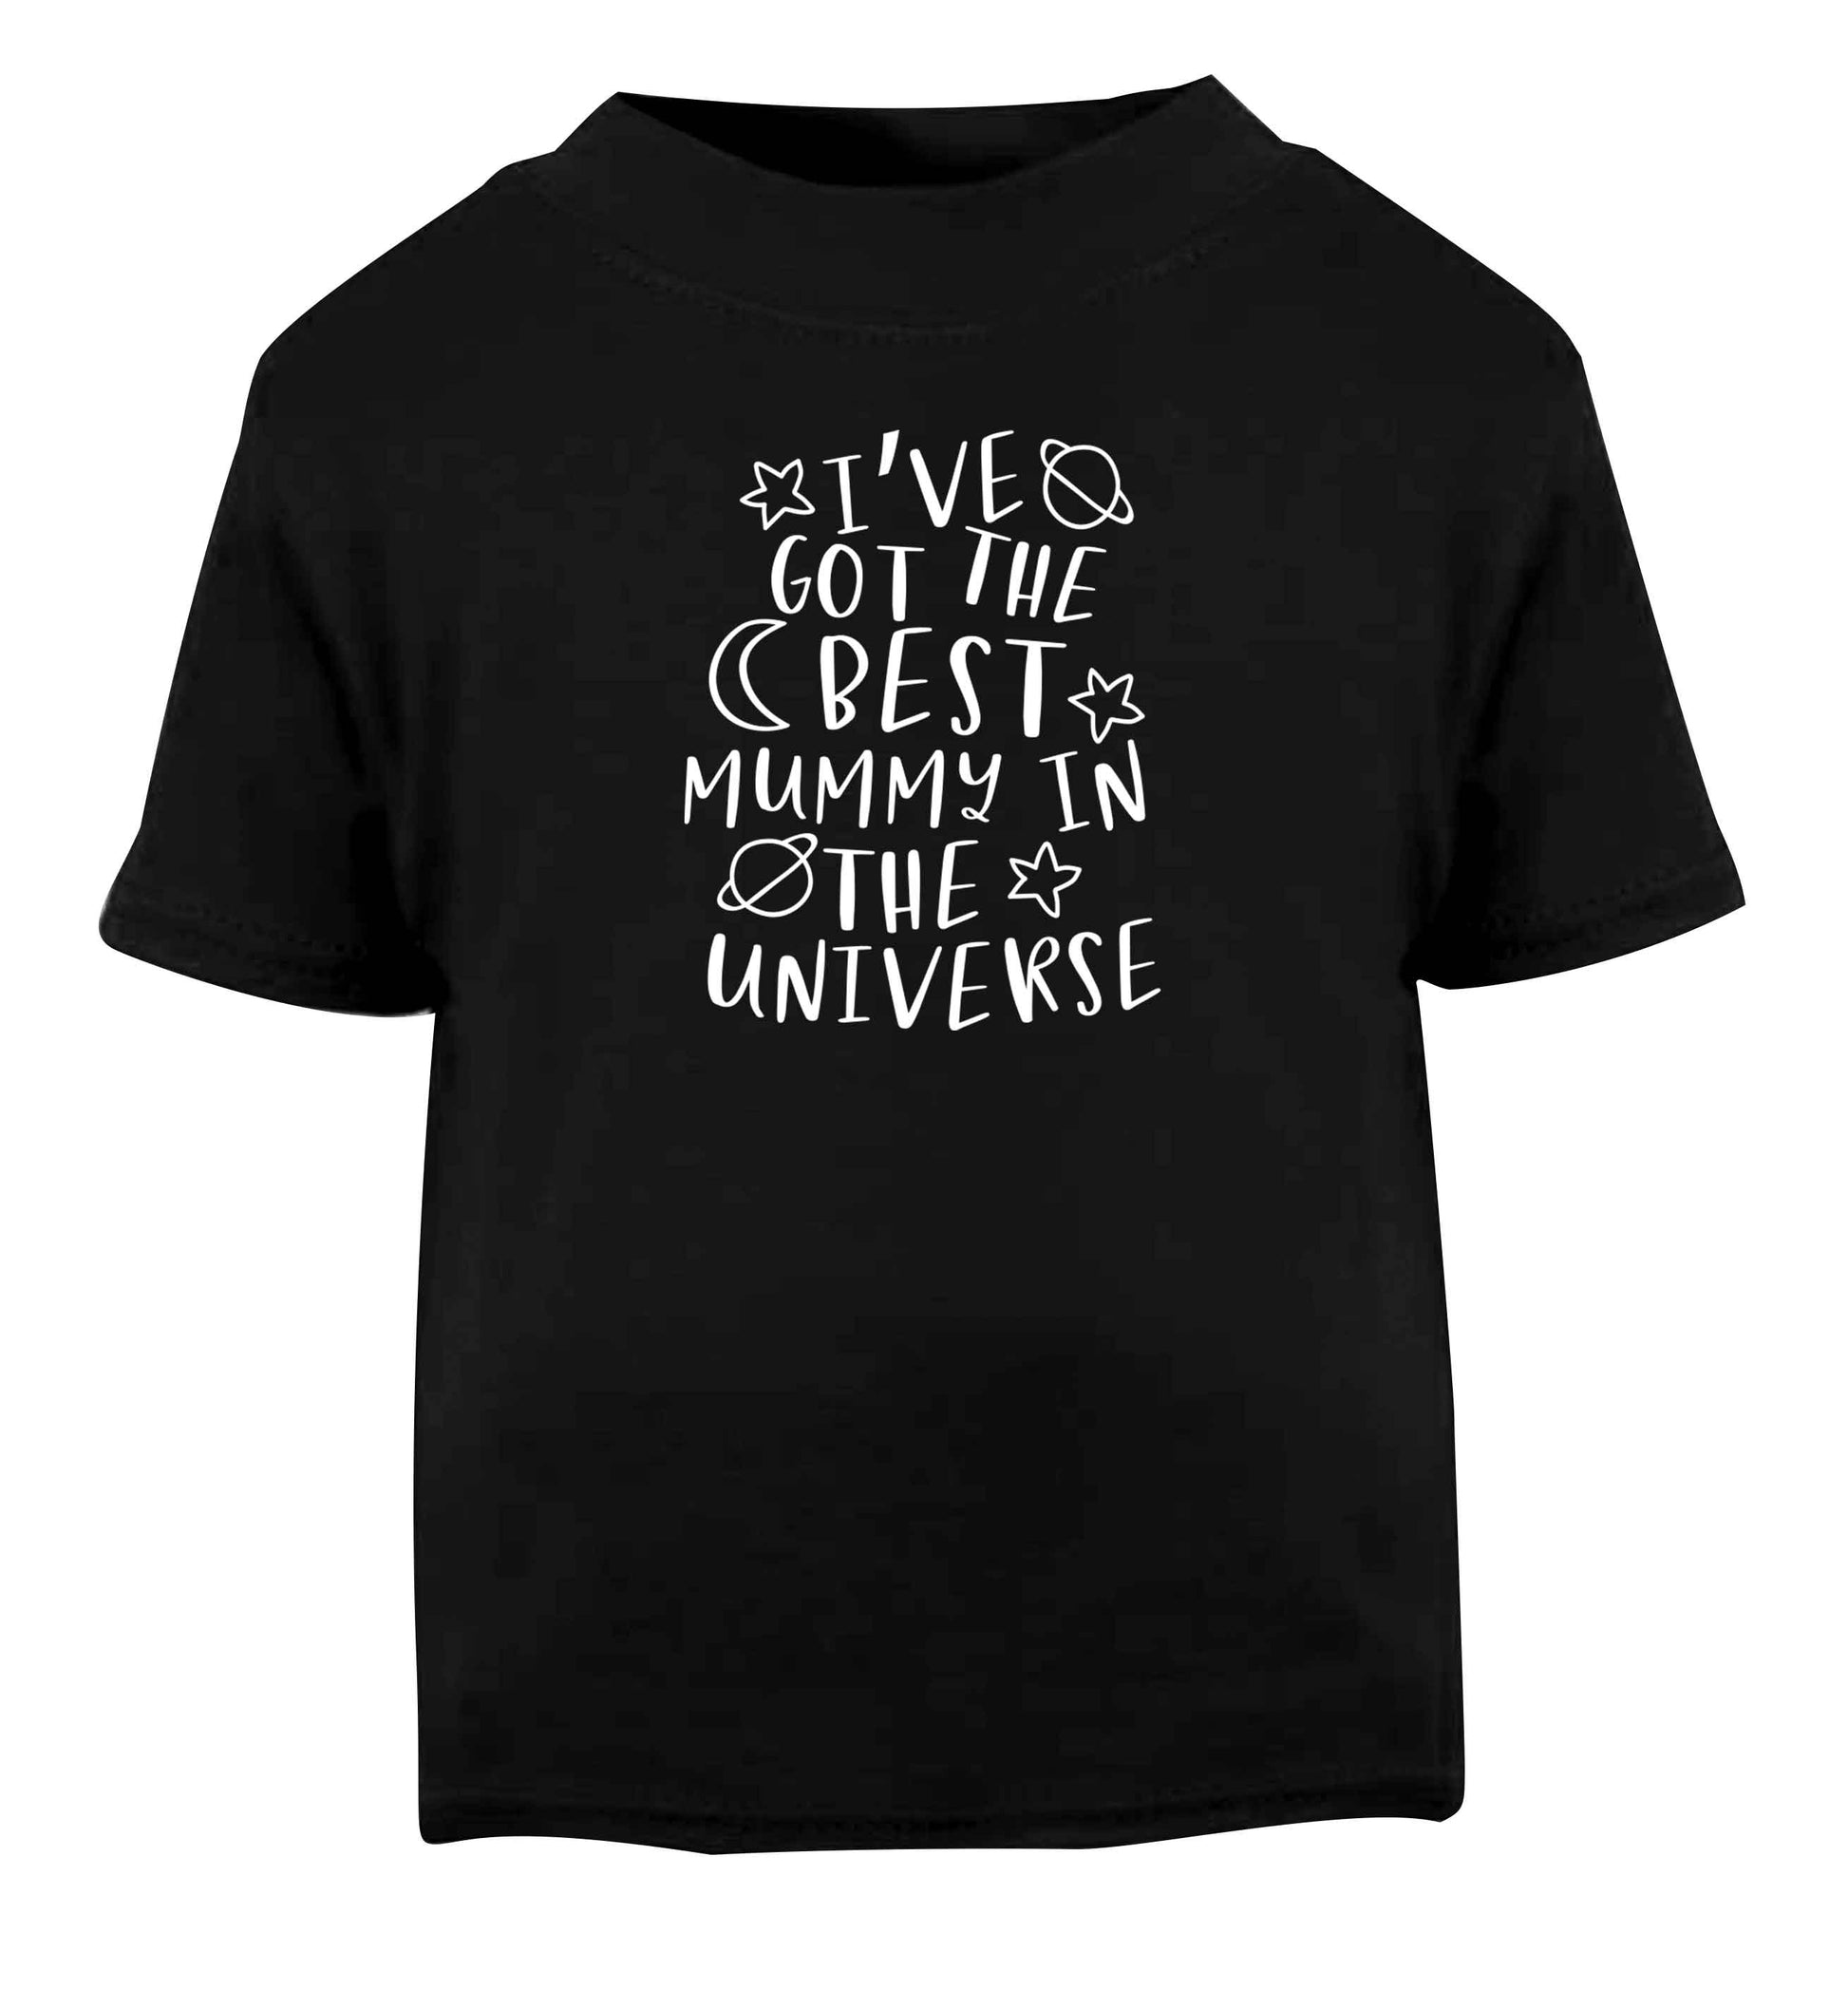 I've got the best mummy in the universe Black baby toddler Tshirt 2 years